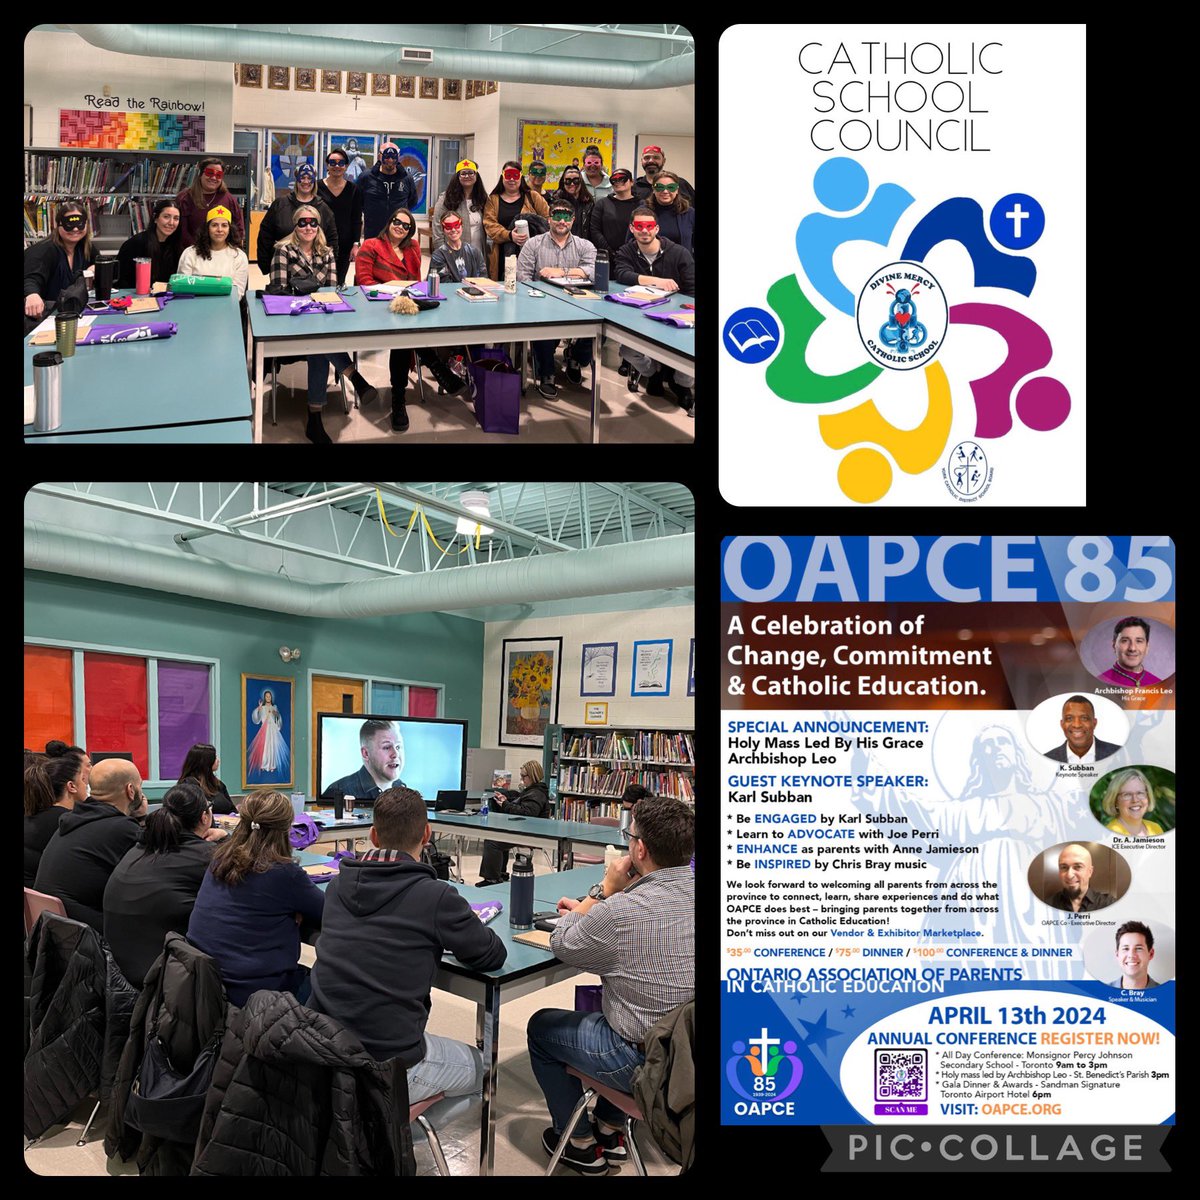 Thanks to the executive team from the Ontario Association of Parents in Catholic Education (OAPCE) for their engaging presentation on parent advocacy at last night’s CSC meeting! Parents as Superheroes for Catholic Education! 🦹🦸‍♂️ @angelasaggese9 @paonesl @YCDSB @oapceontario